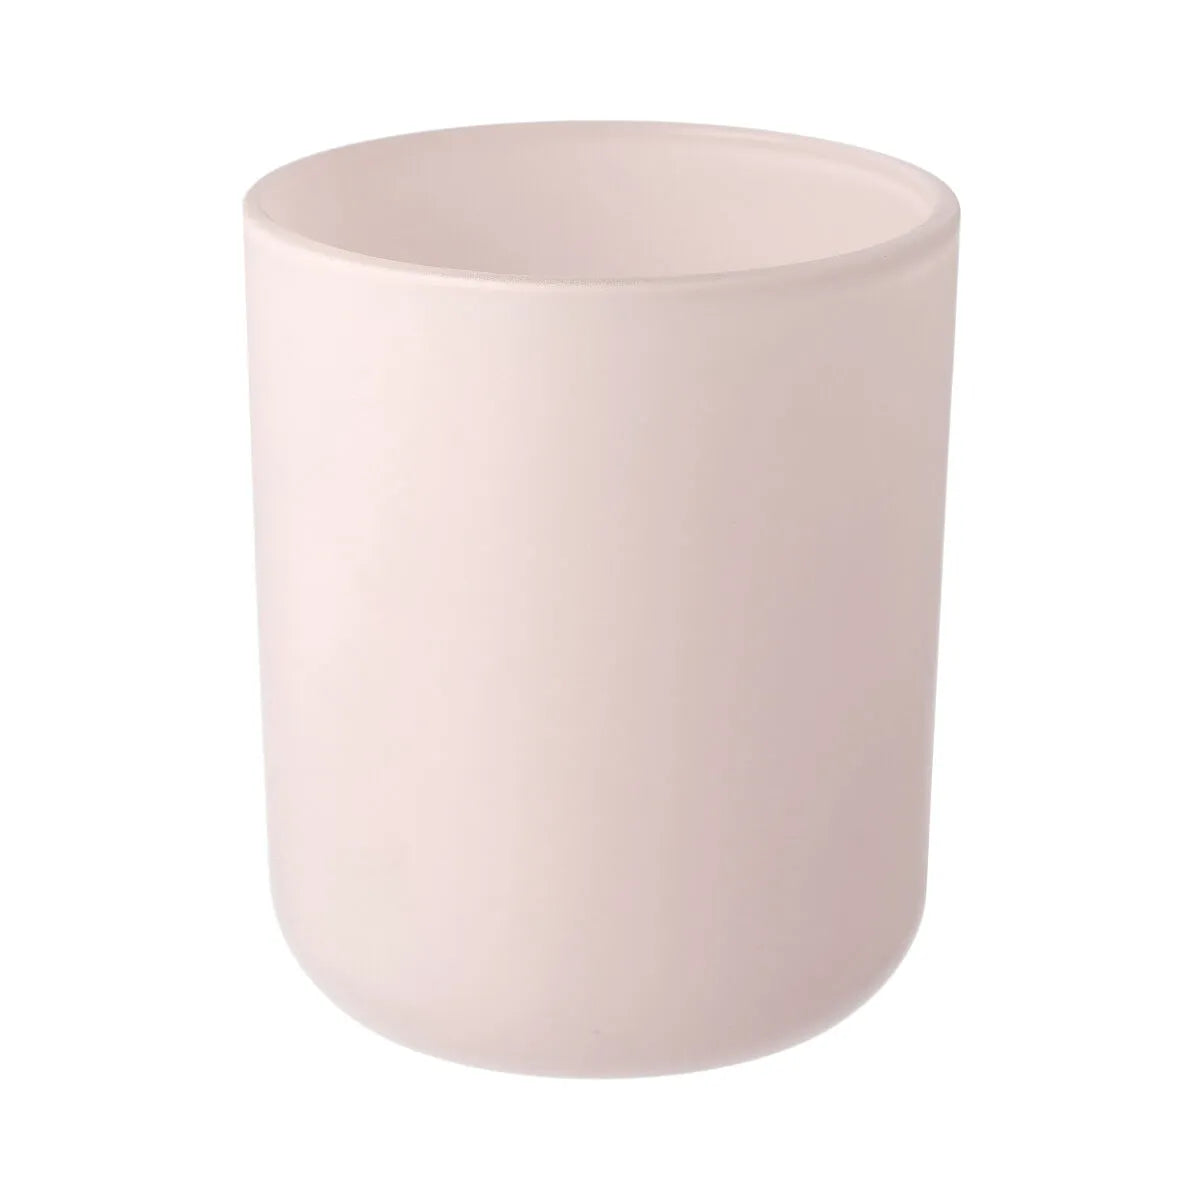 Party Punch Medium Soy Candle